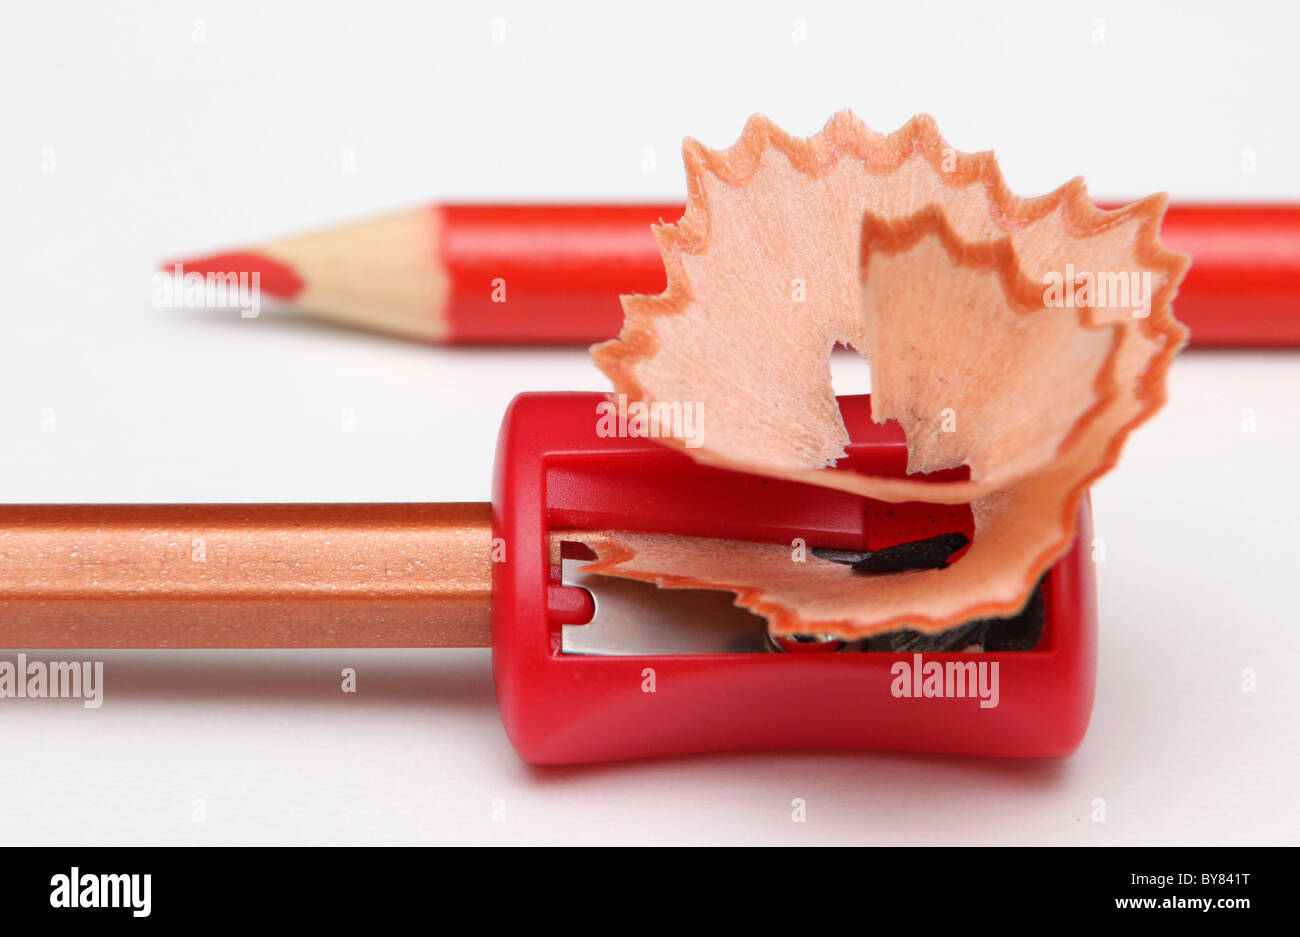 With a red pencil-sharpener and shavings. Stock Photo